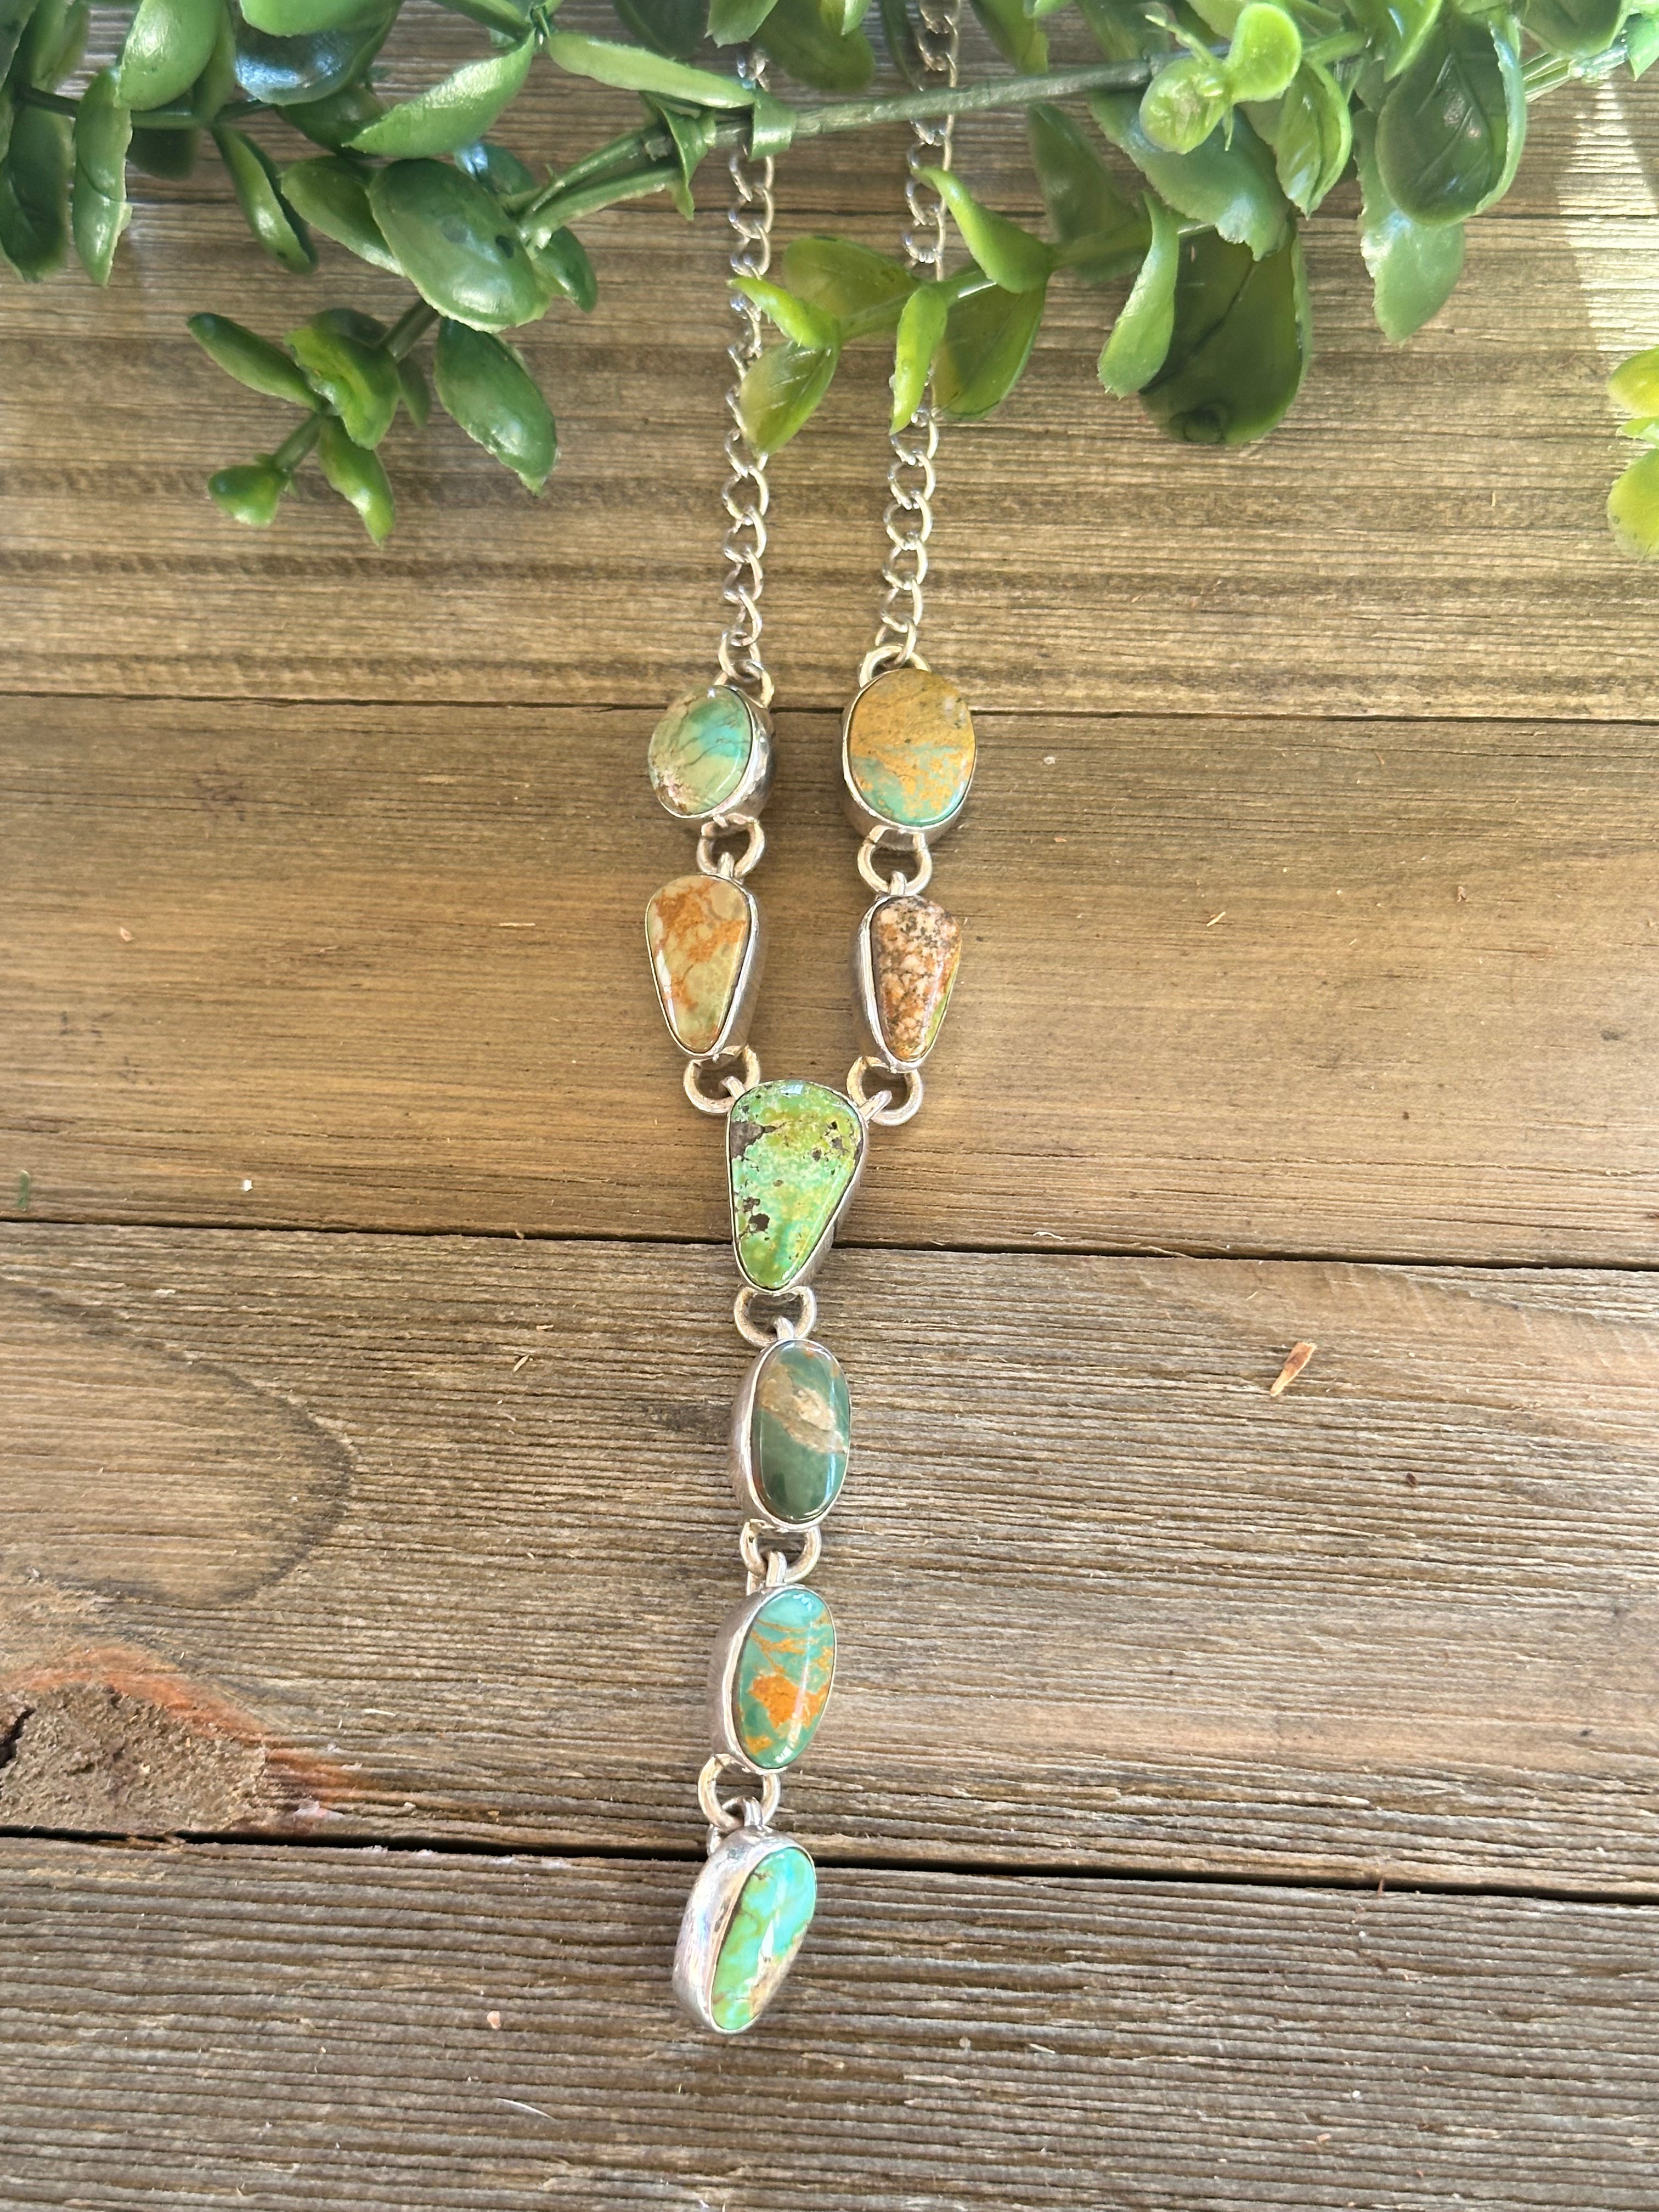 Southwest Made Royston Turquoise & Sterling Silver Lariat Necklace